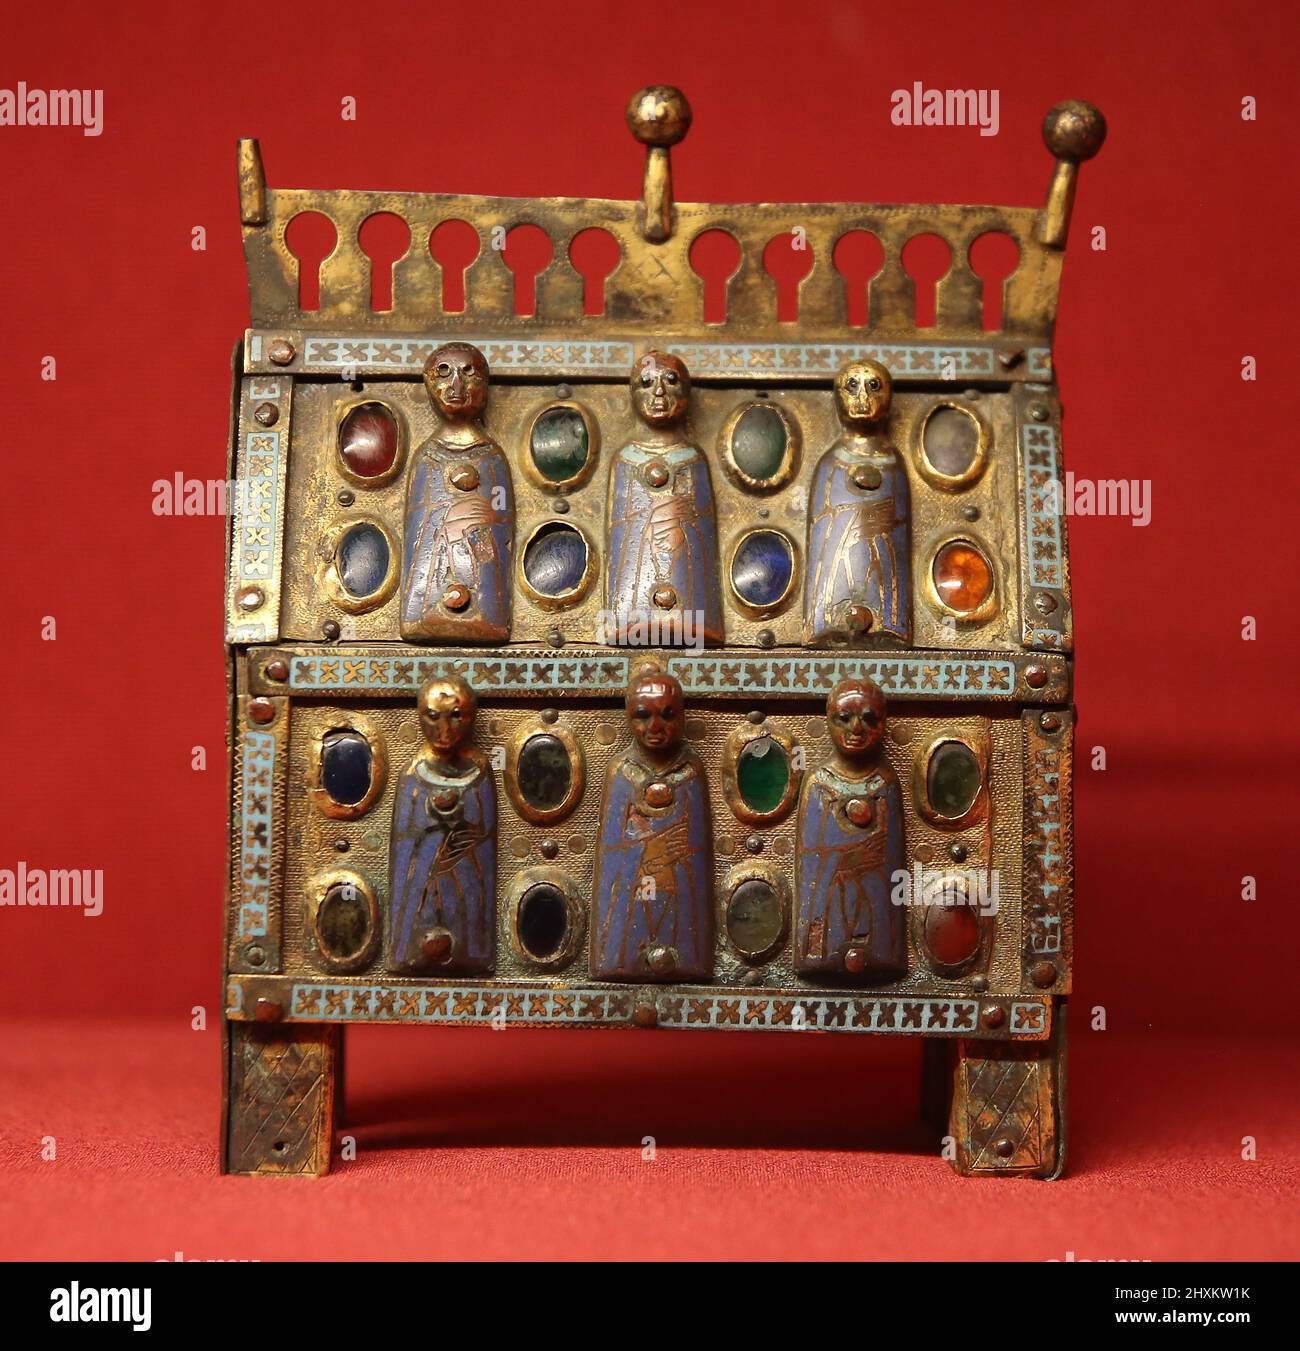 Chasse or box reliquary. Figures enamelled and gems. Limoges. France. 13th century. Mares Museum. Barcelona. Spain Stock Photo